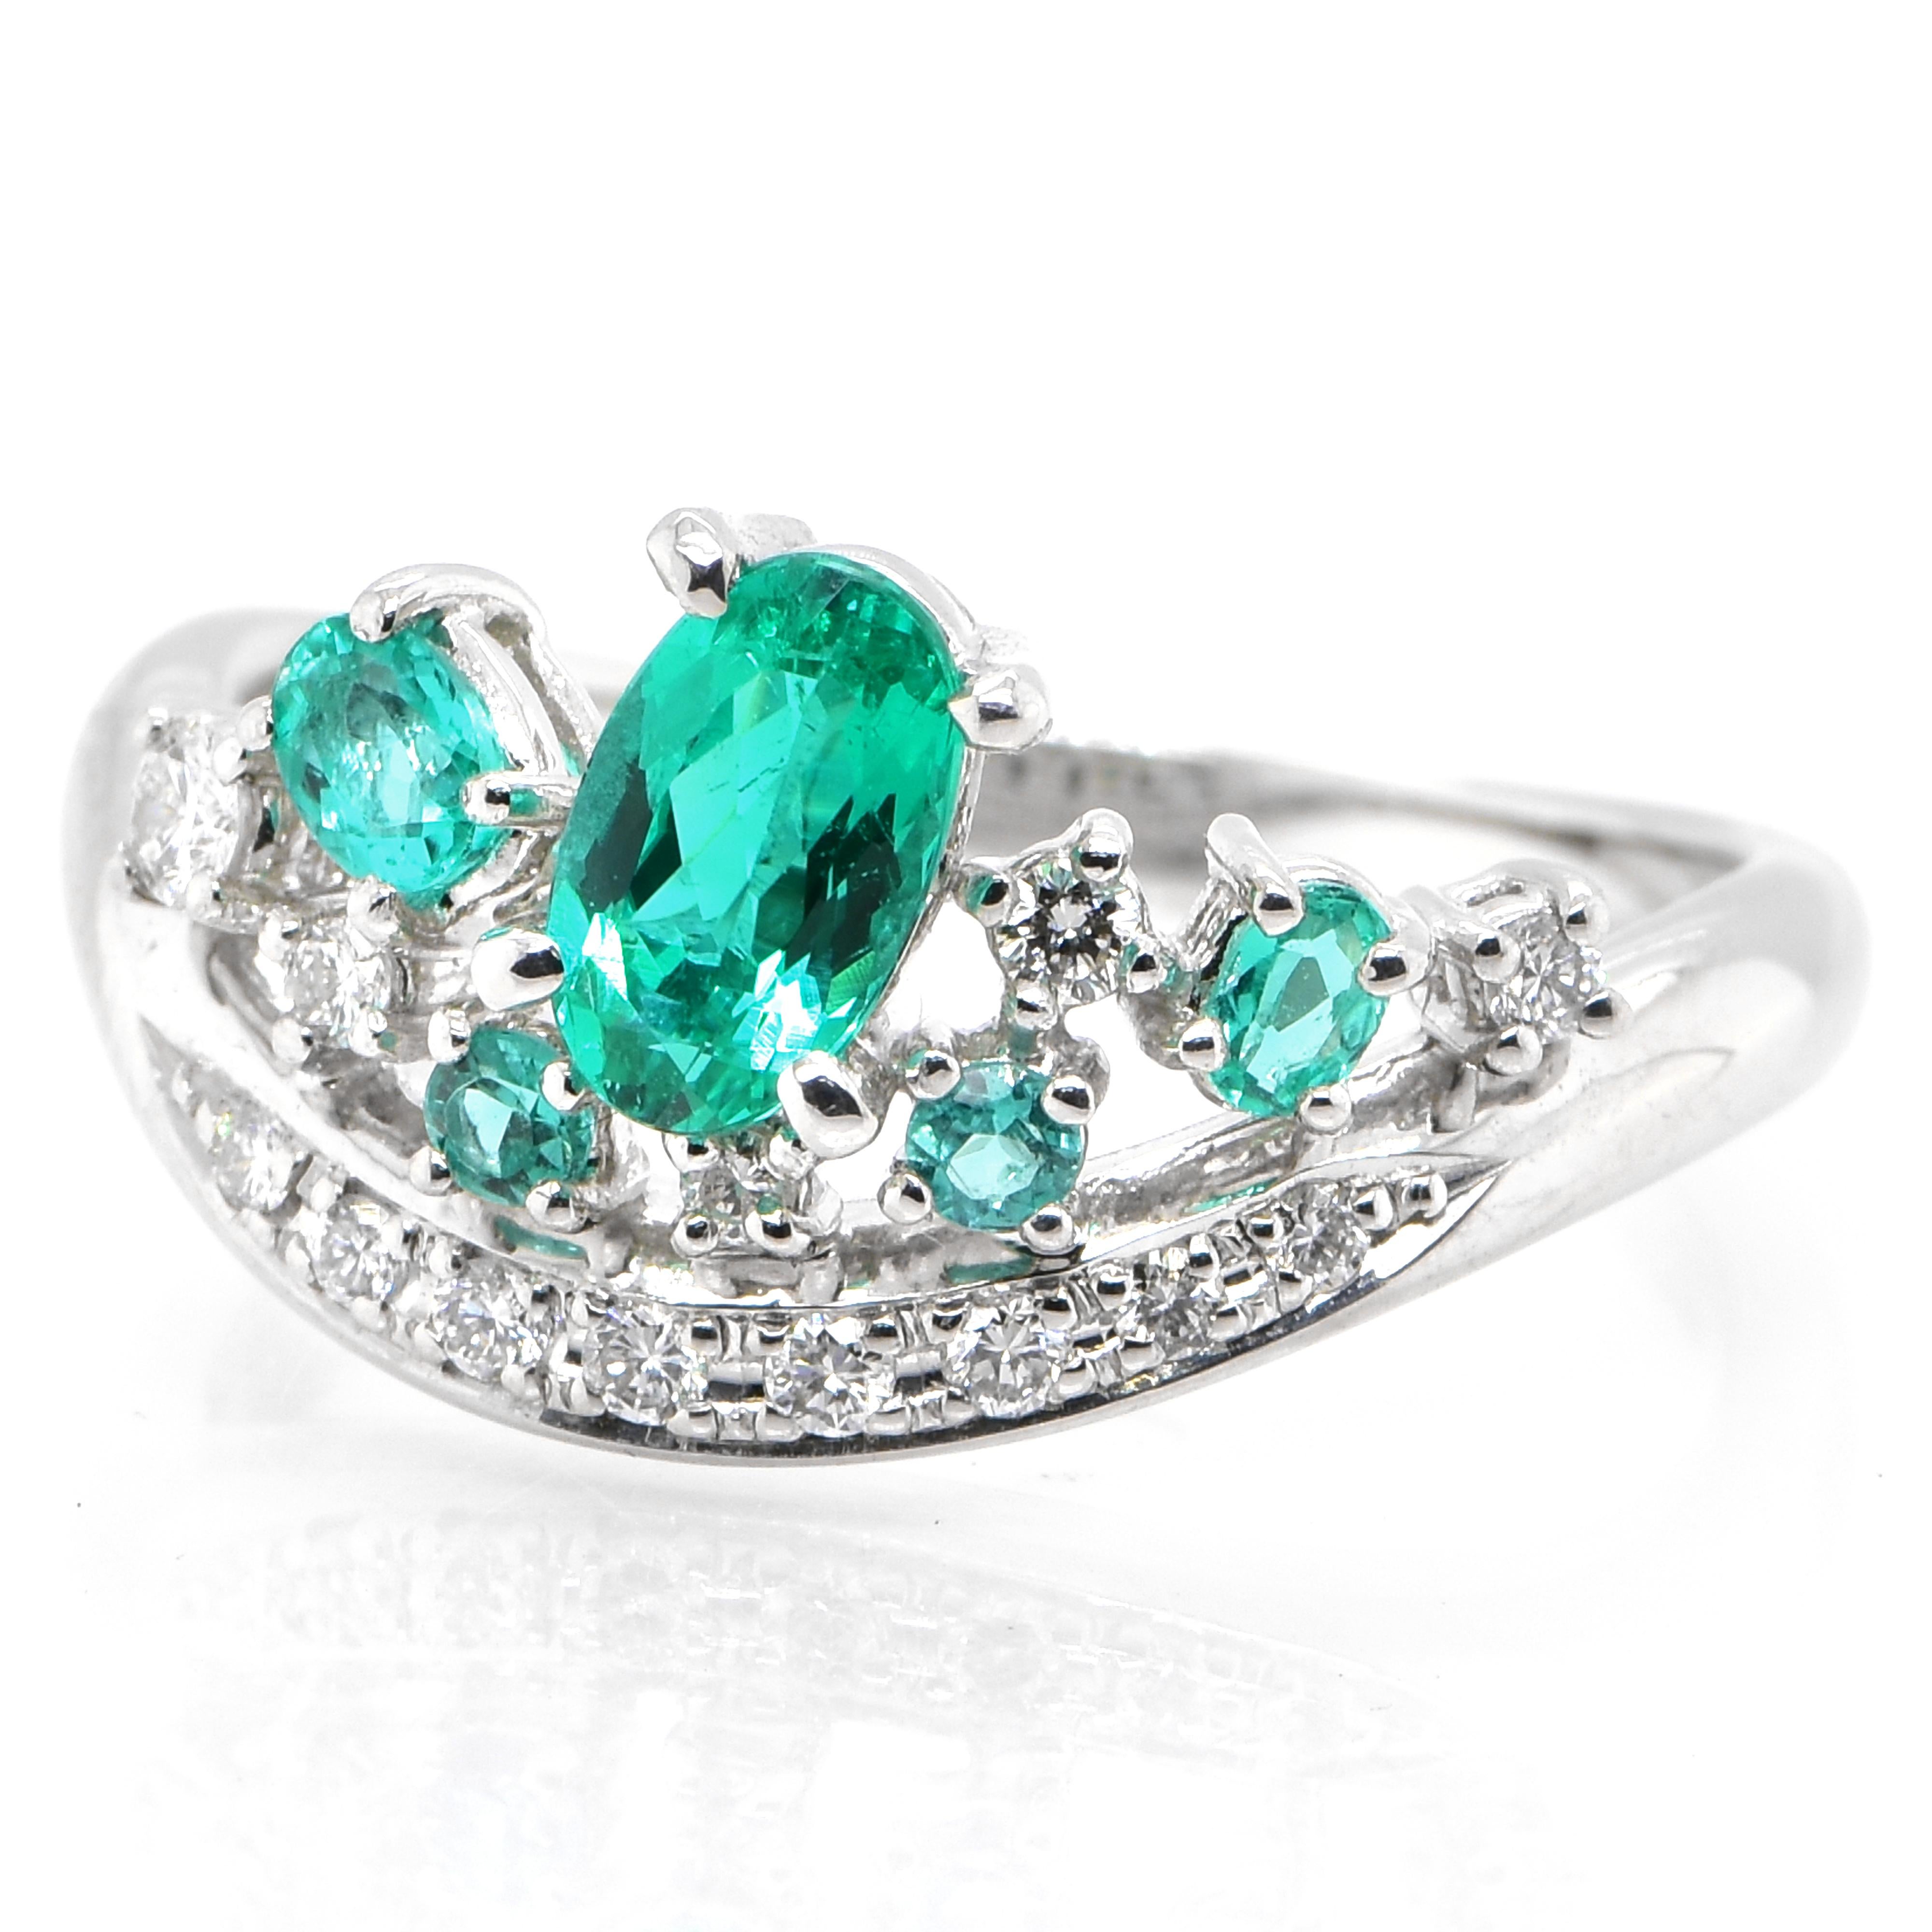 A beautiful ring featuring a GIA Certified 0.65 Carat Natural Brazilian Paraiba Tourmaline and 0.19 Carats of Diamond Accents set in Platinum. Paraiba Tourmalines were only discovered 30 years ago in the Brazilian state of the same name- Paraiba.